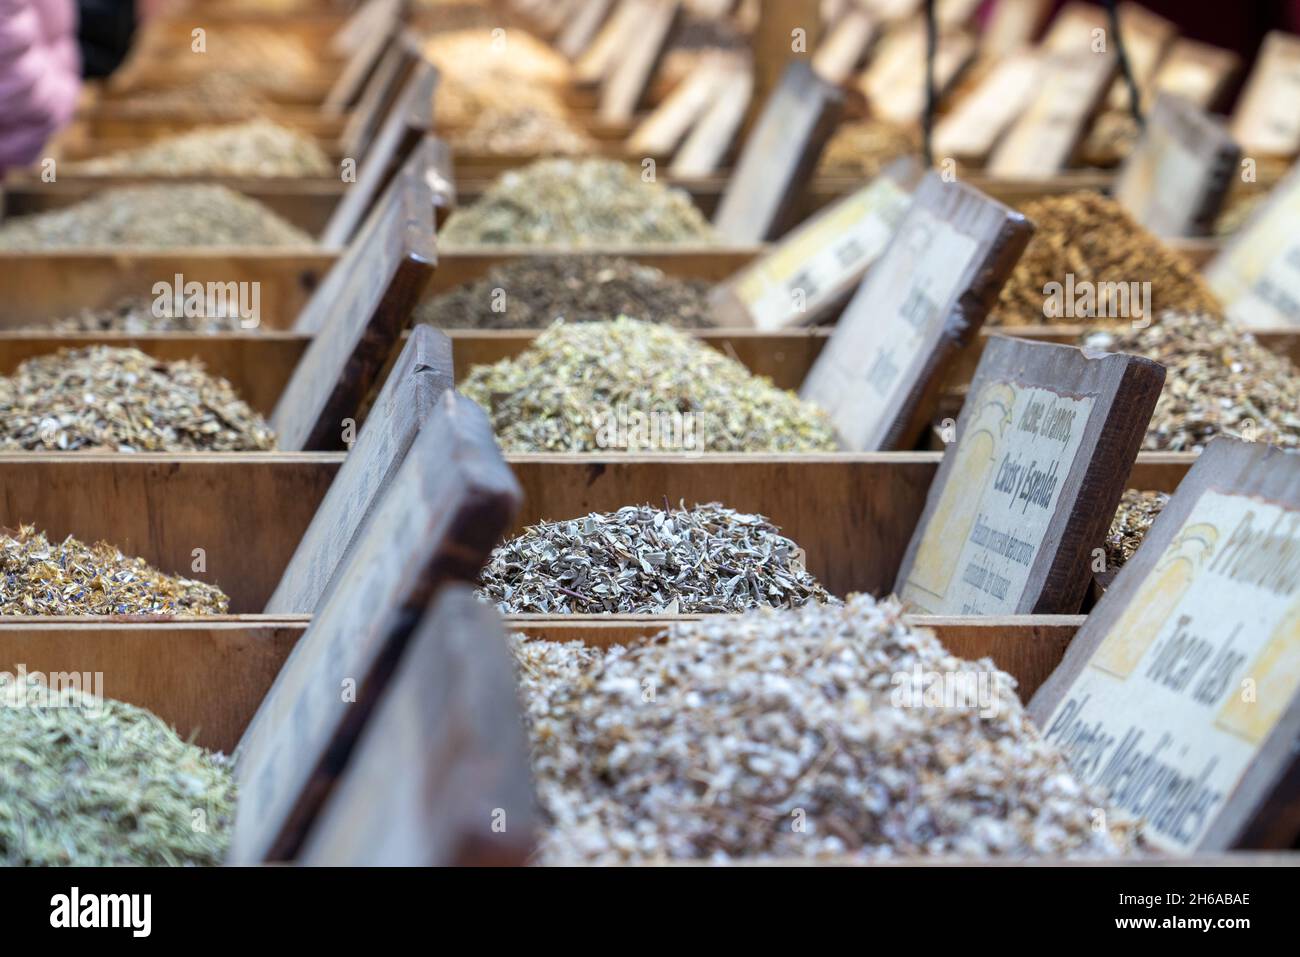 rows of boxes with spices at the fair, selective focus Stock Photo